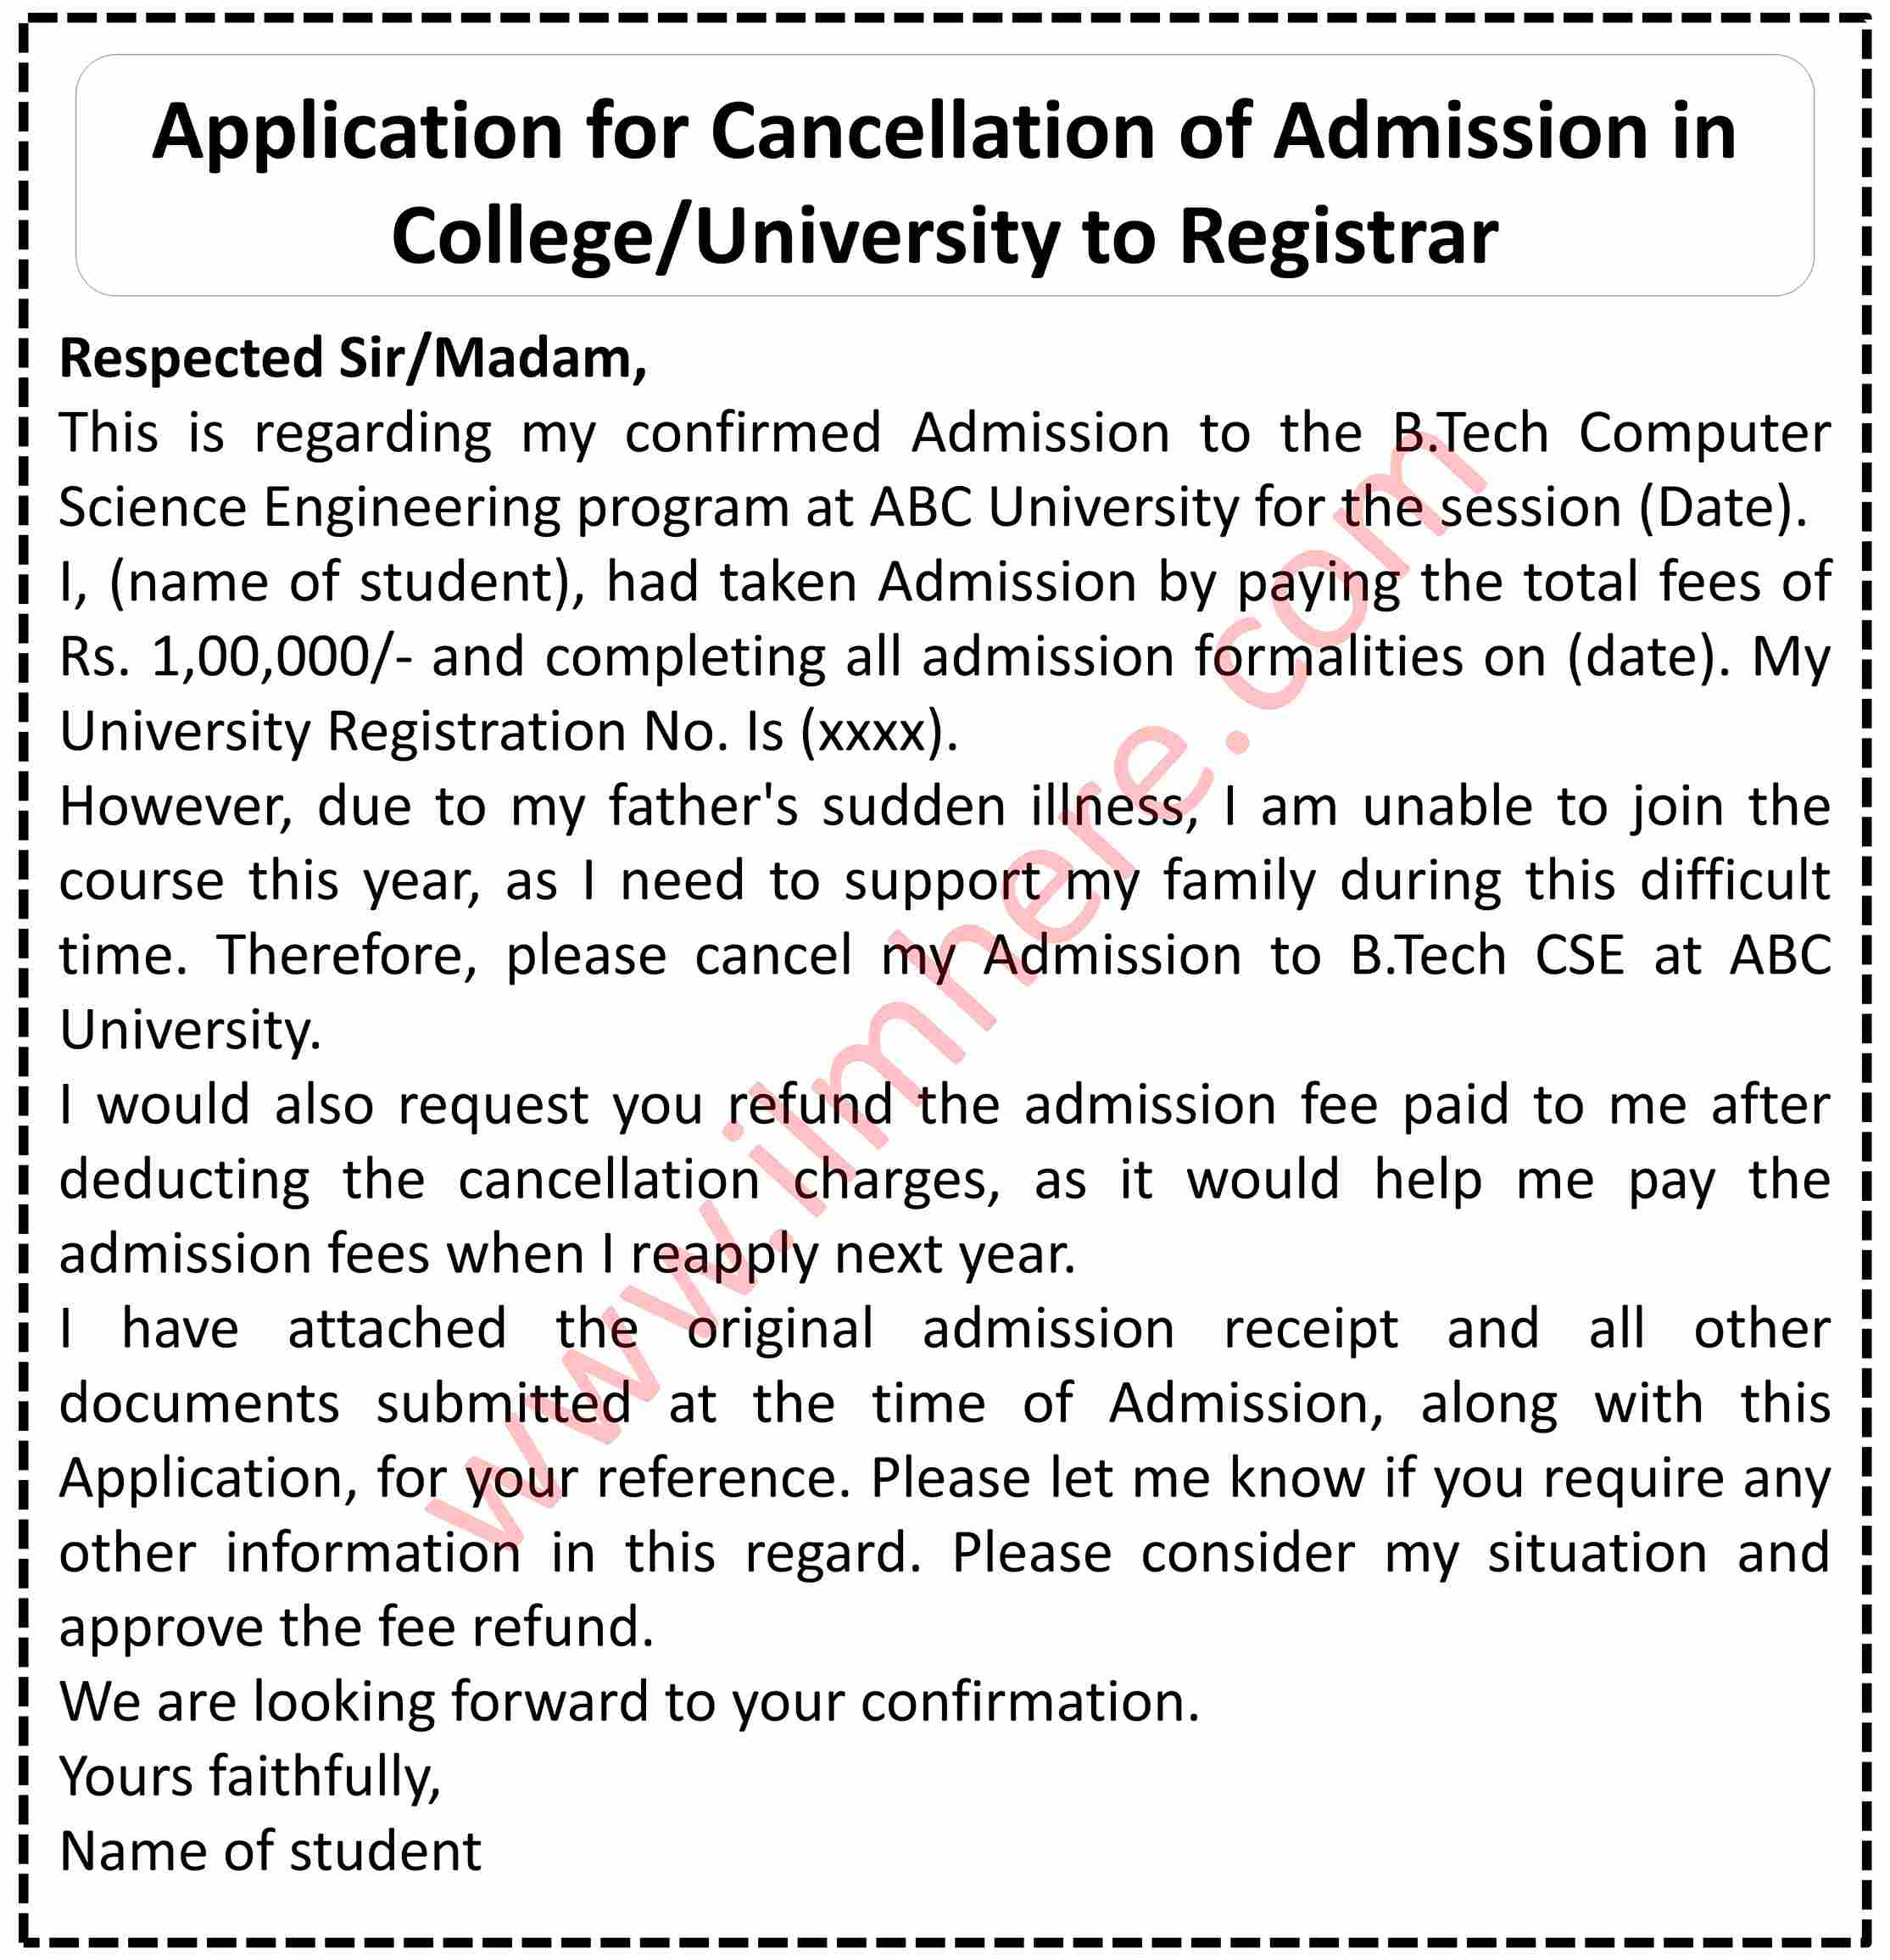 Application for Cancellation of Admission in College University to Registrar